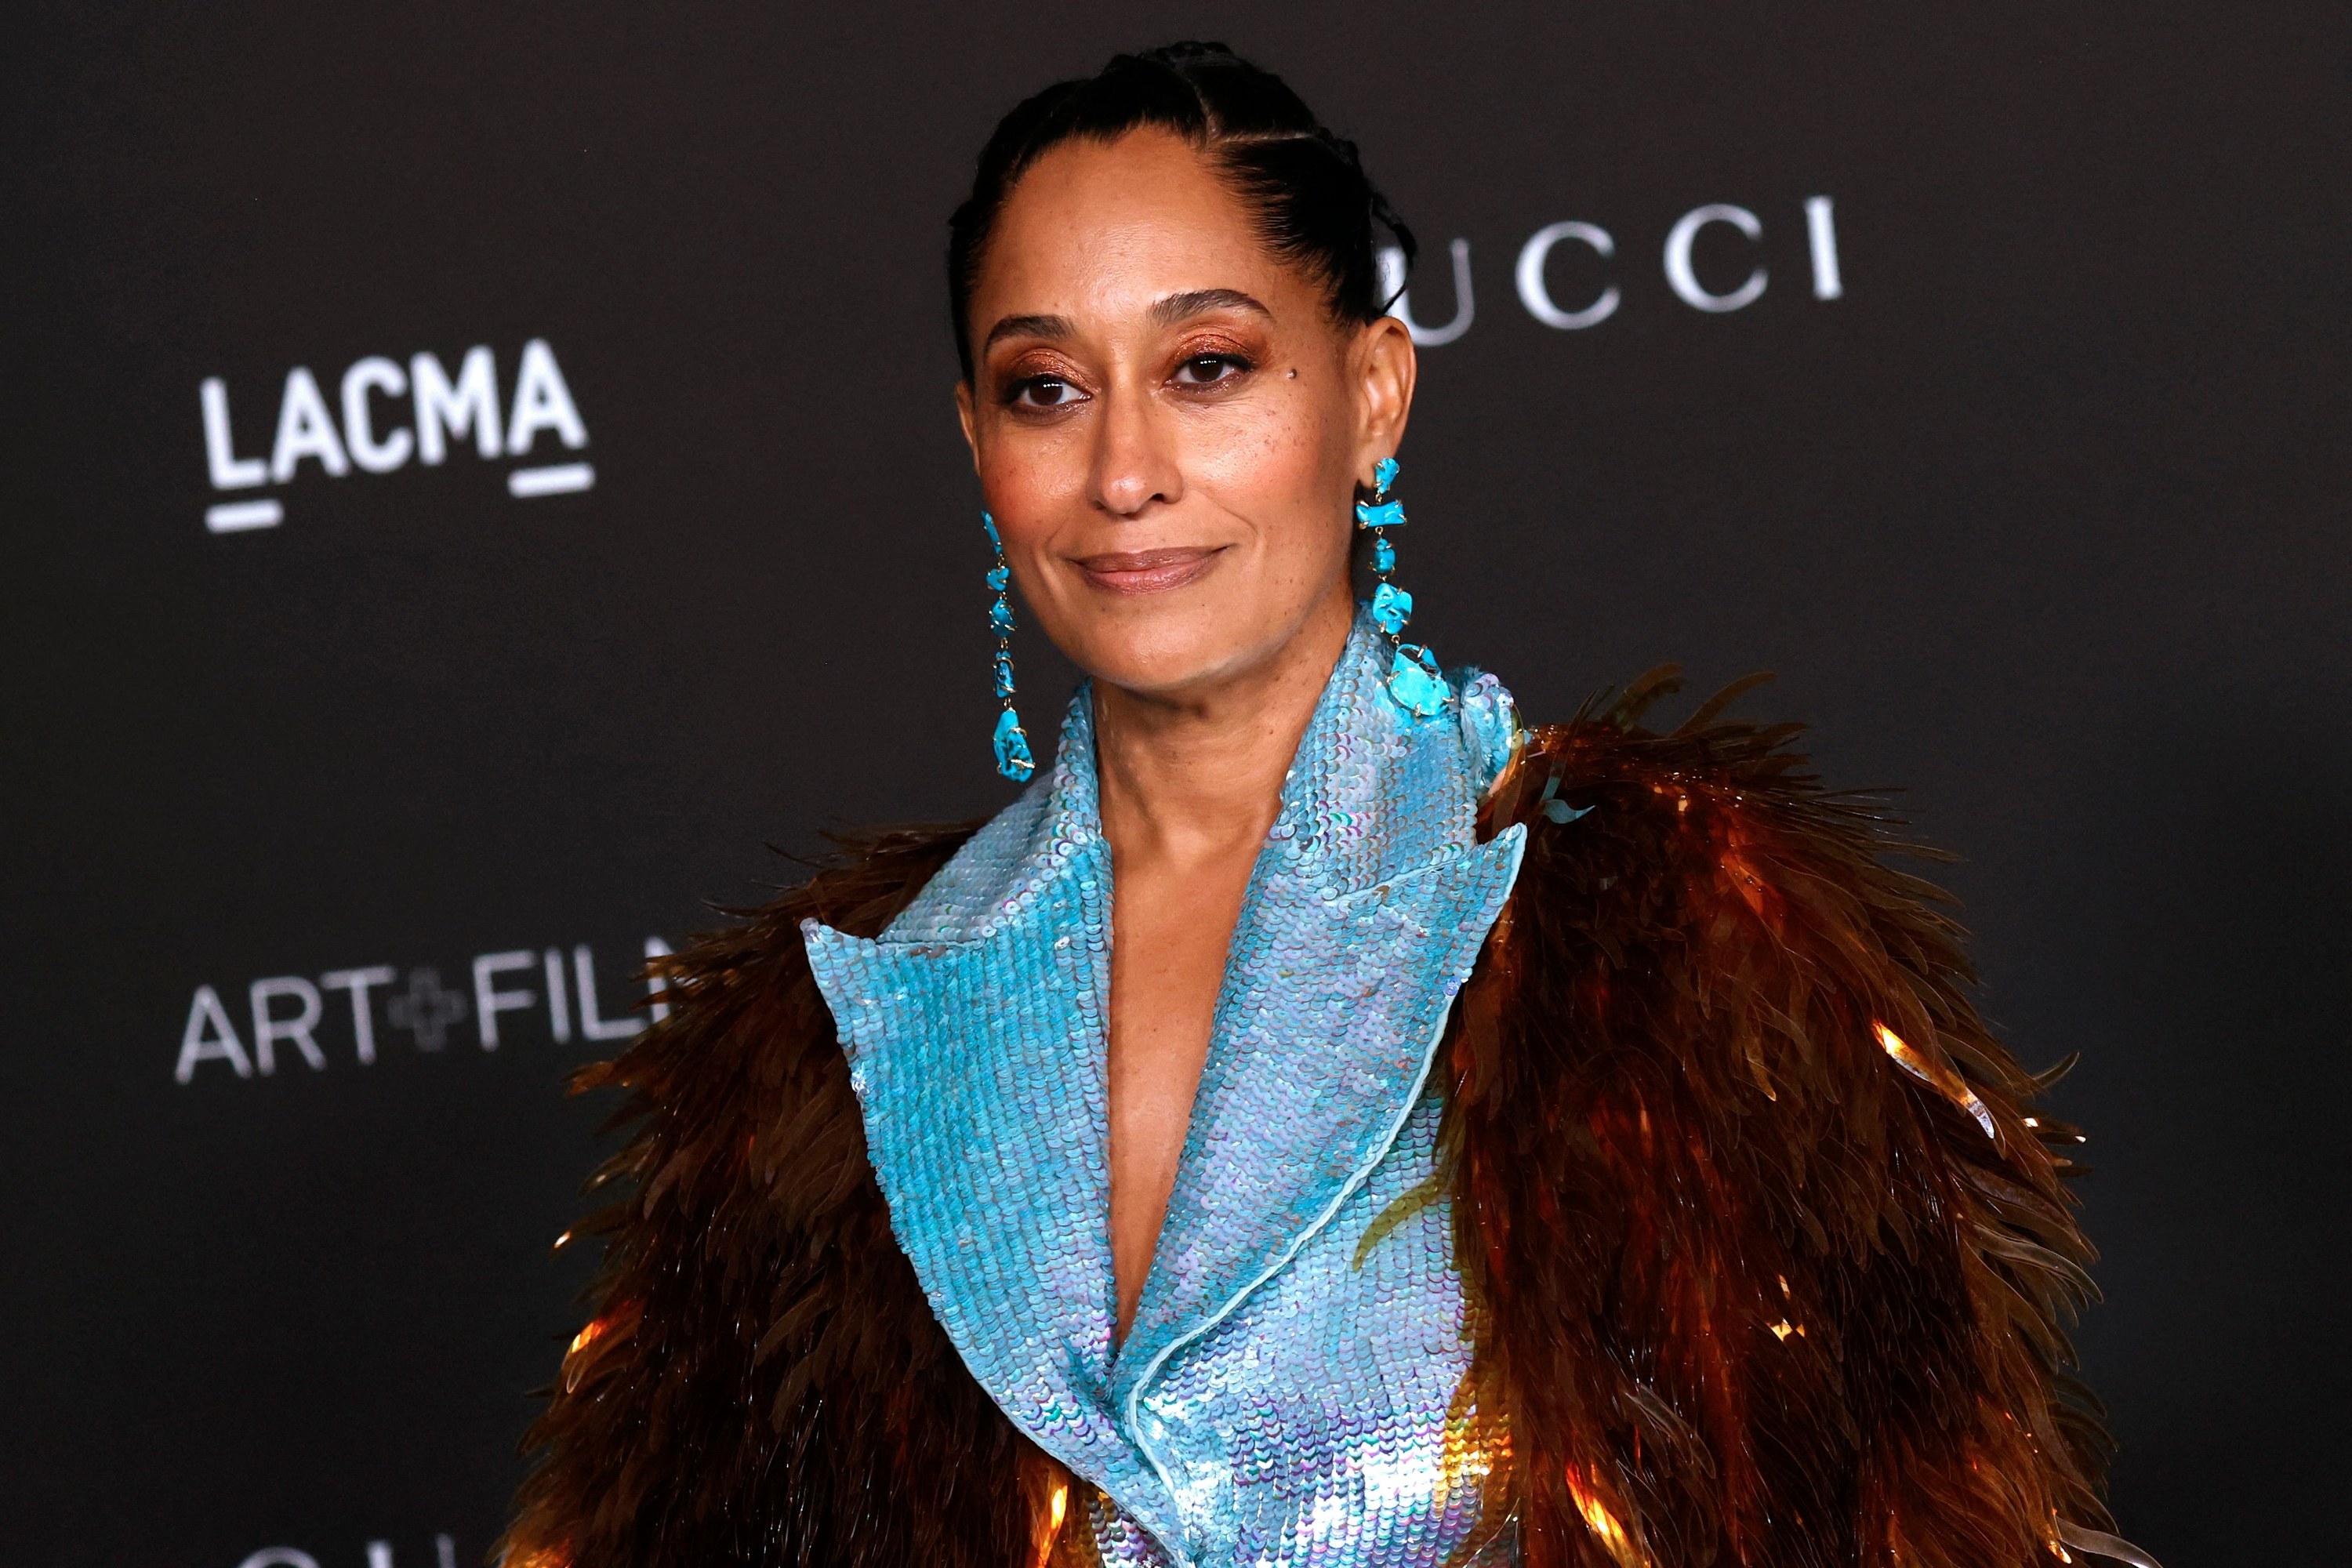 image of Tracee Ellis Ross at a red carpet